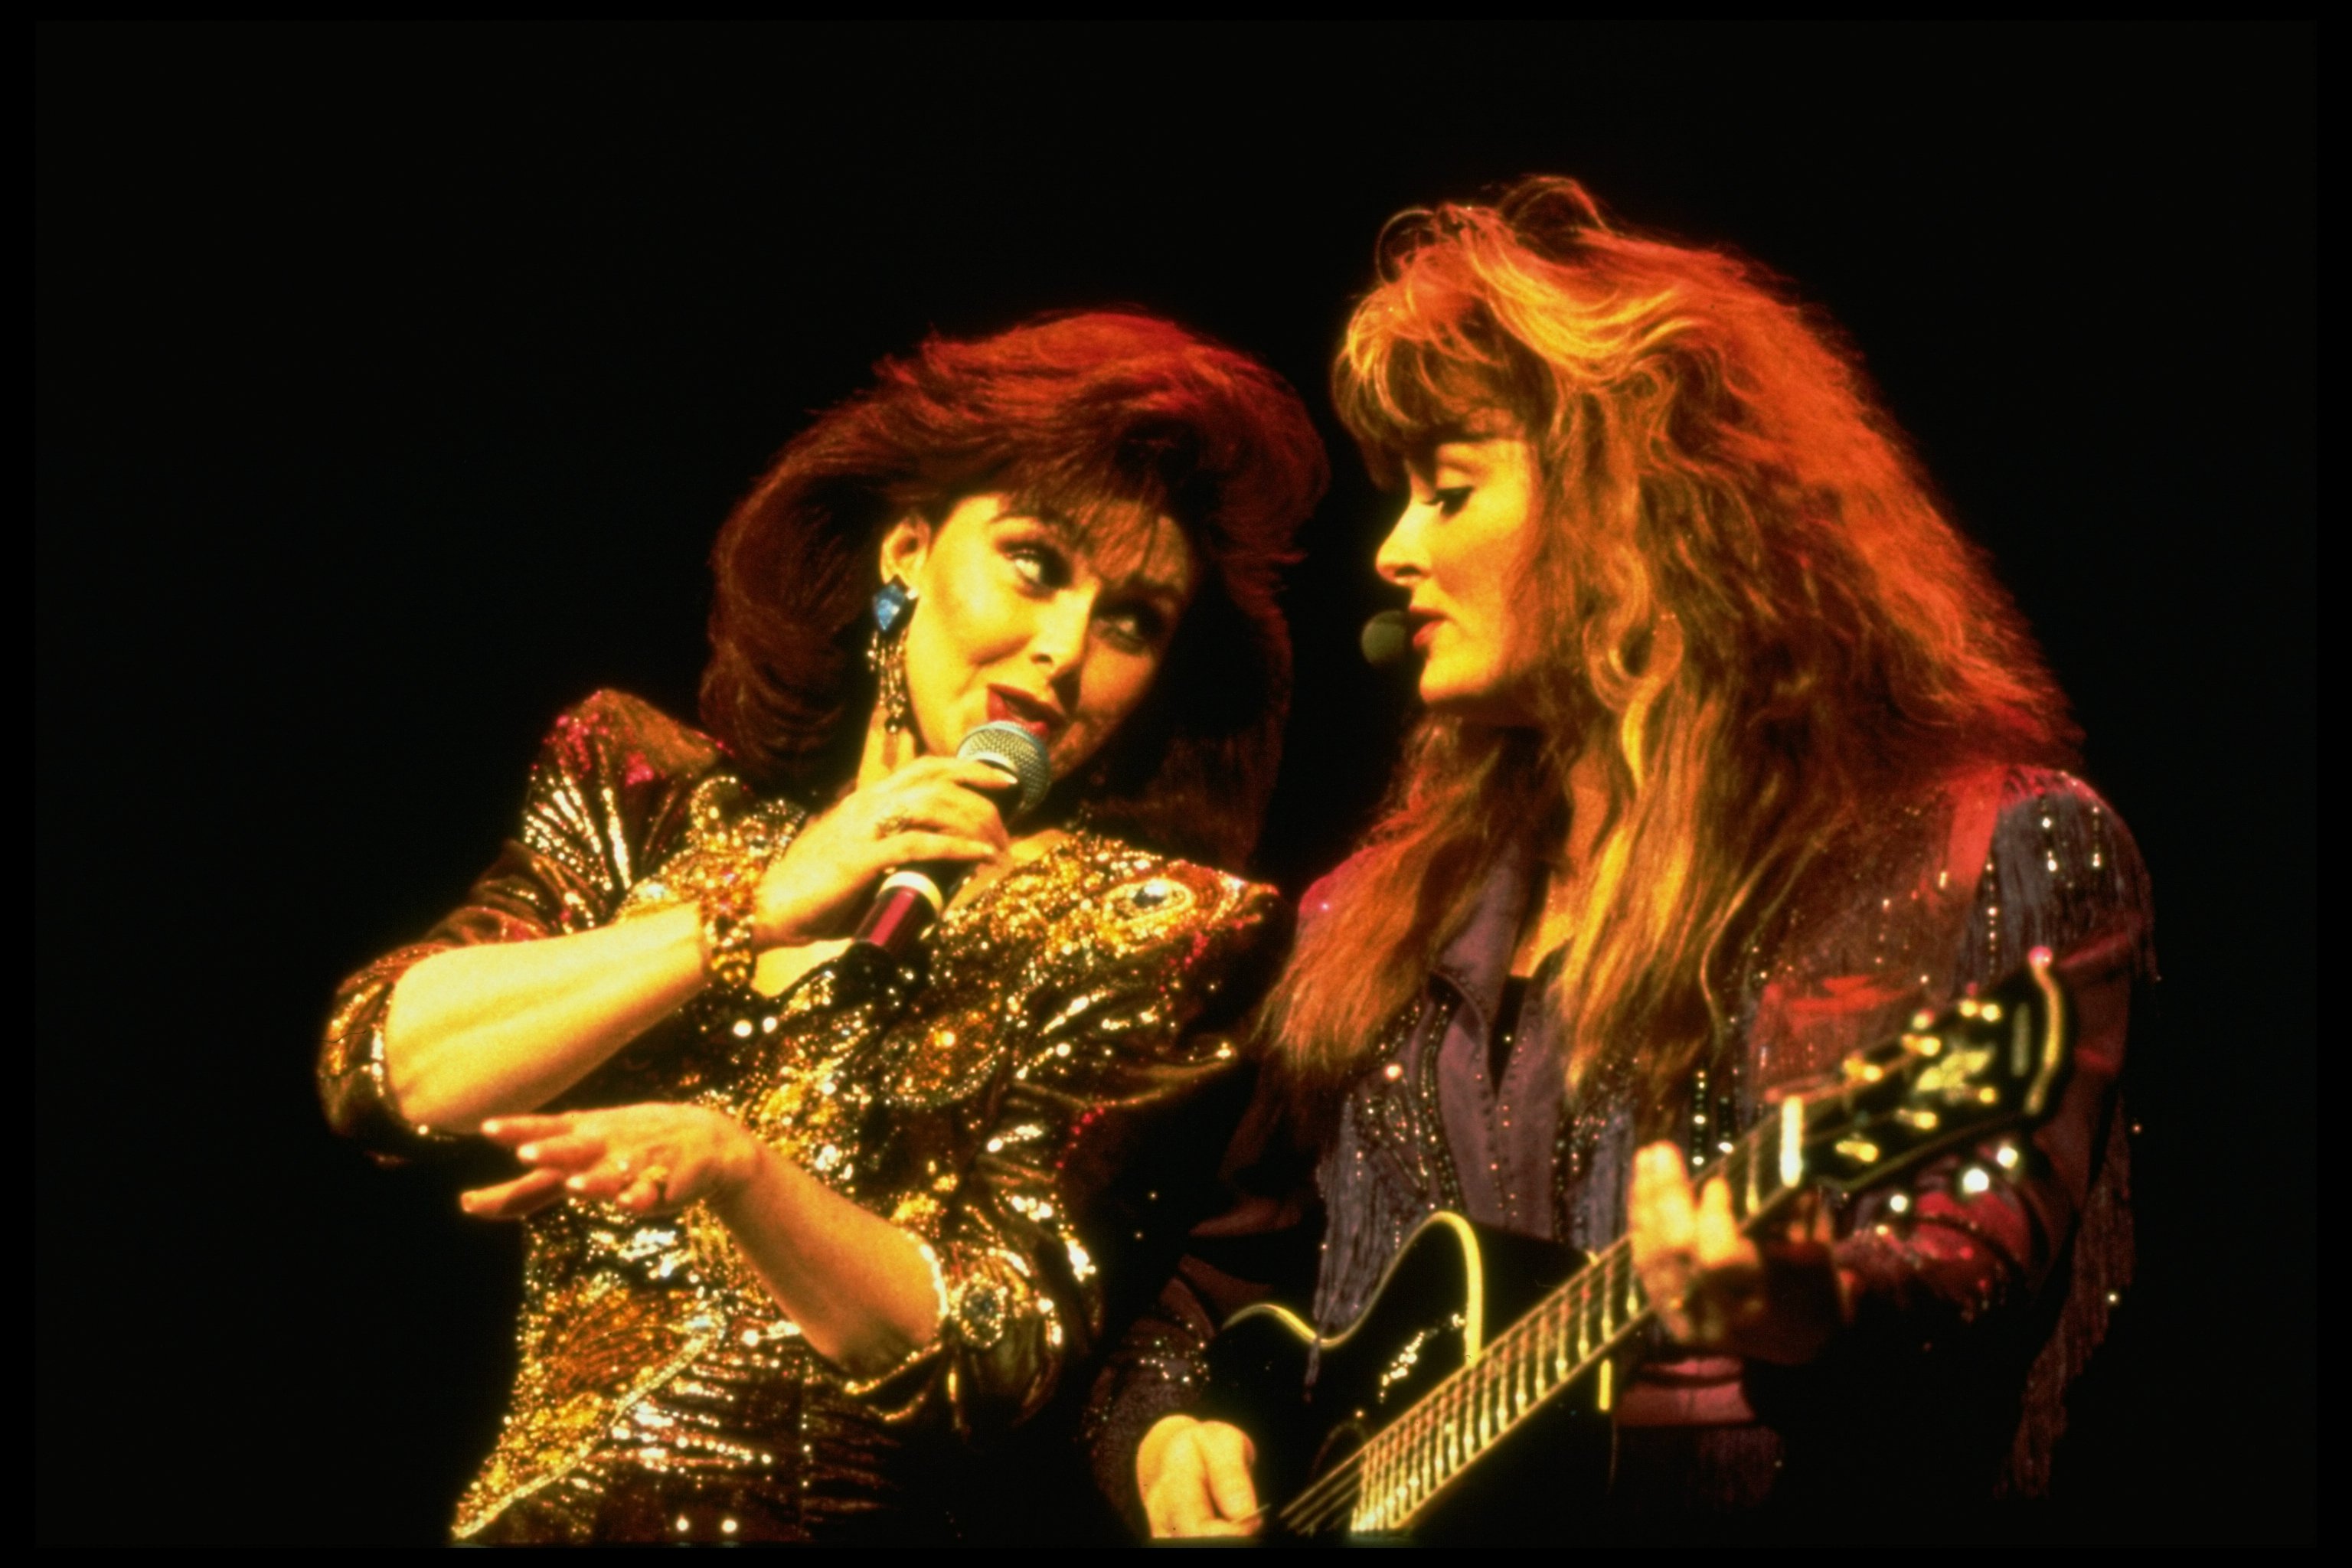 Mother and daughter C/W duo Naomi and Wynonna Judd singing in concert. | Source: Getty Images